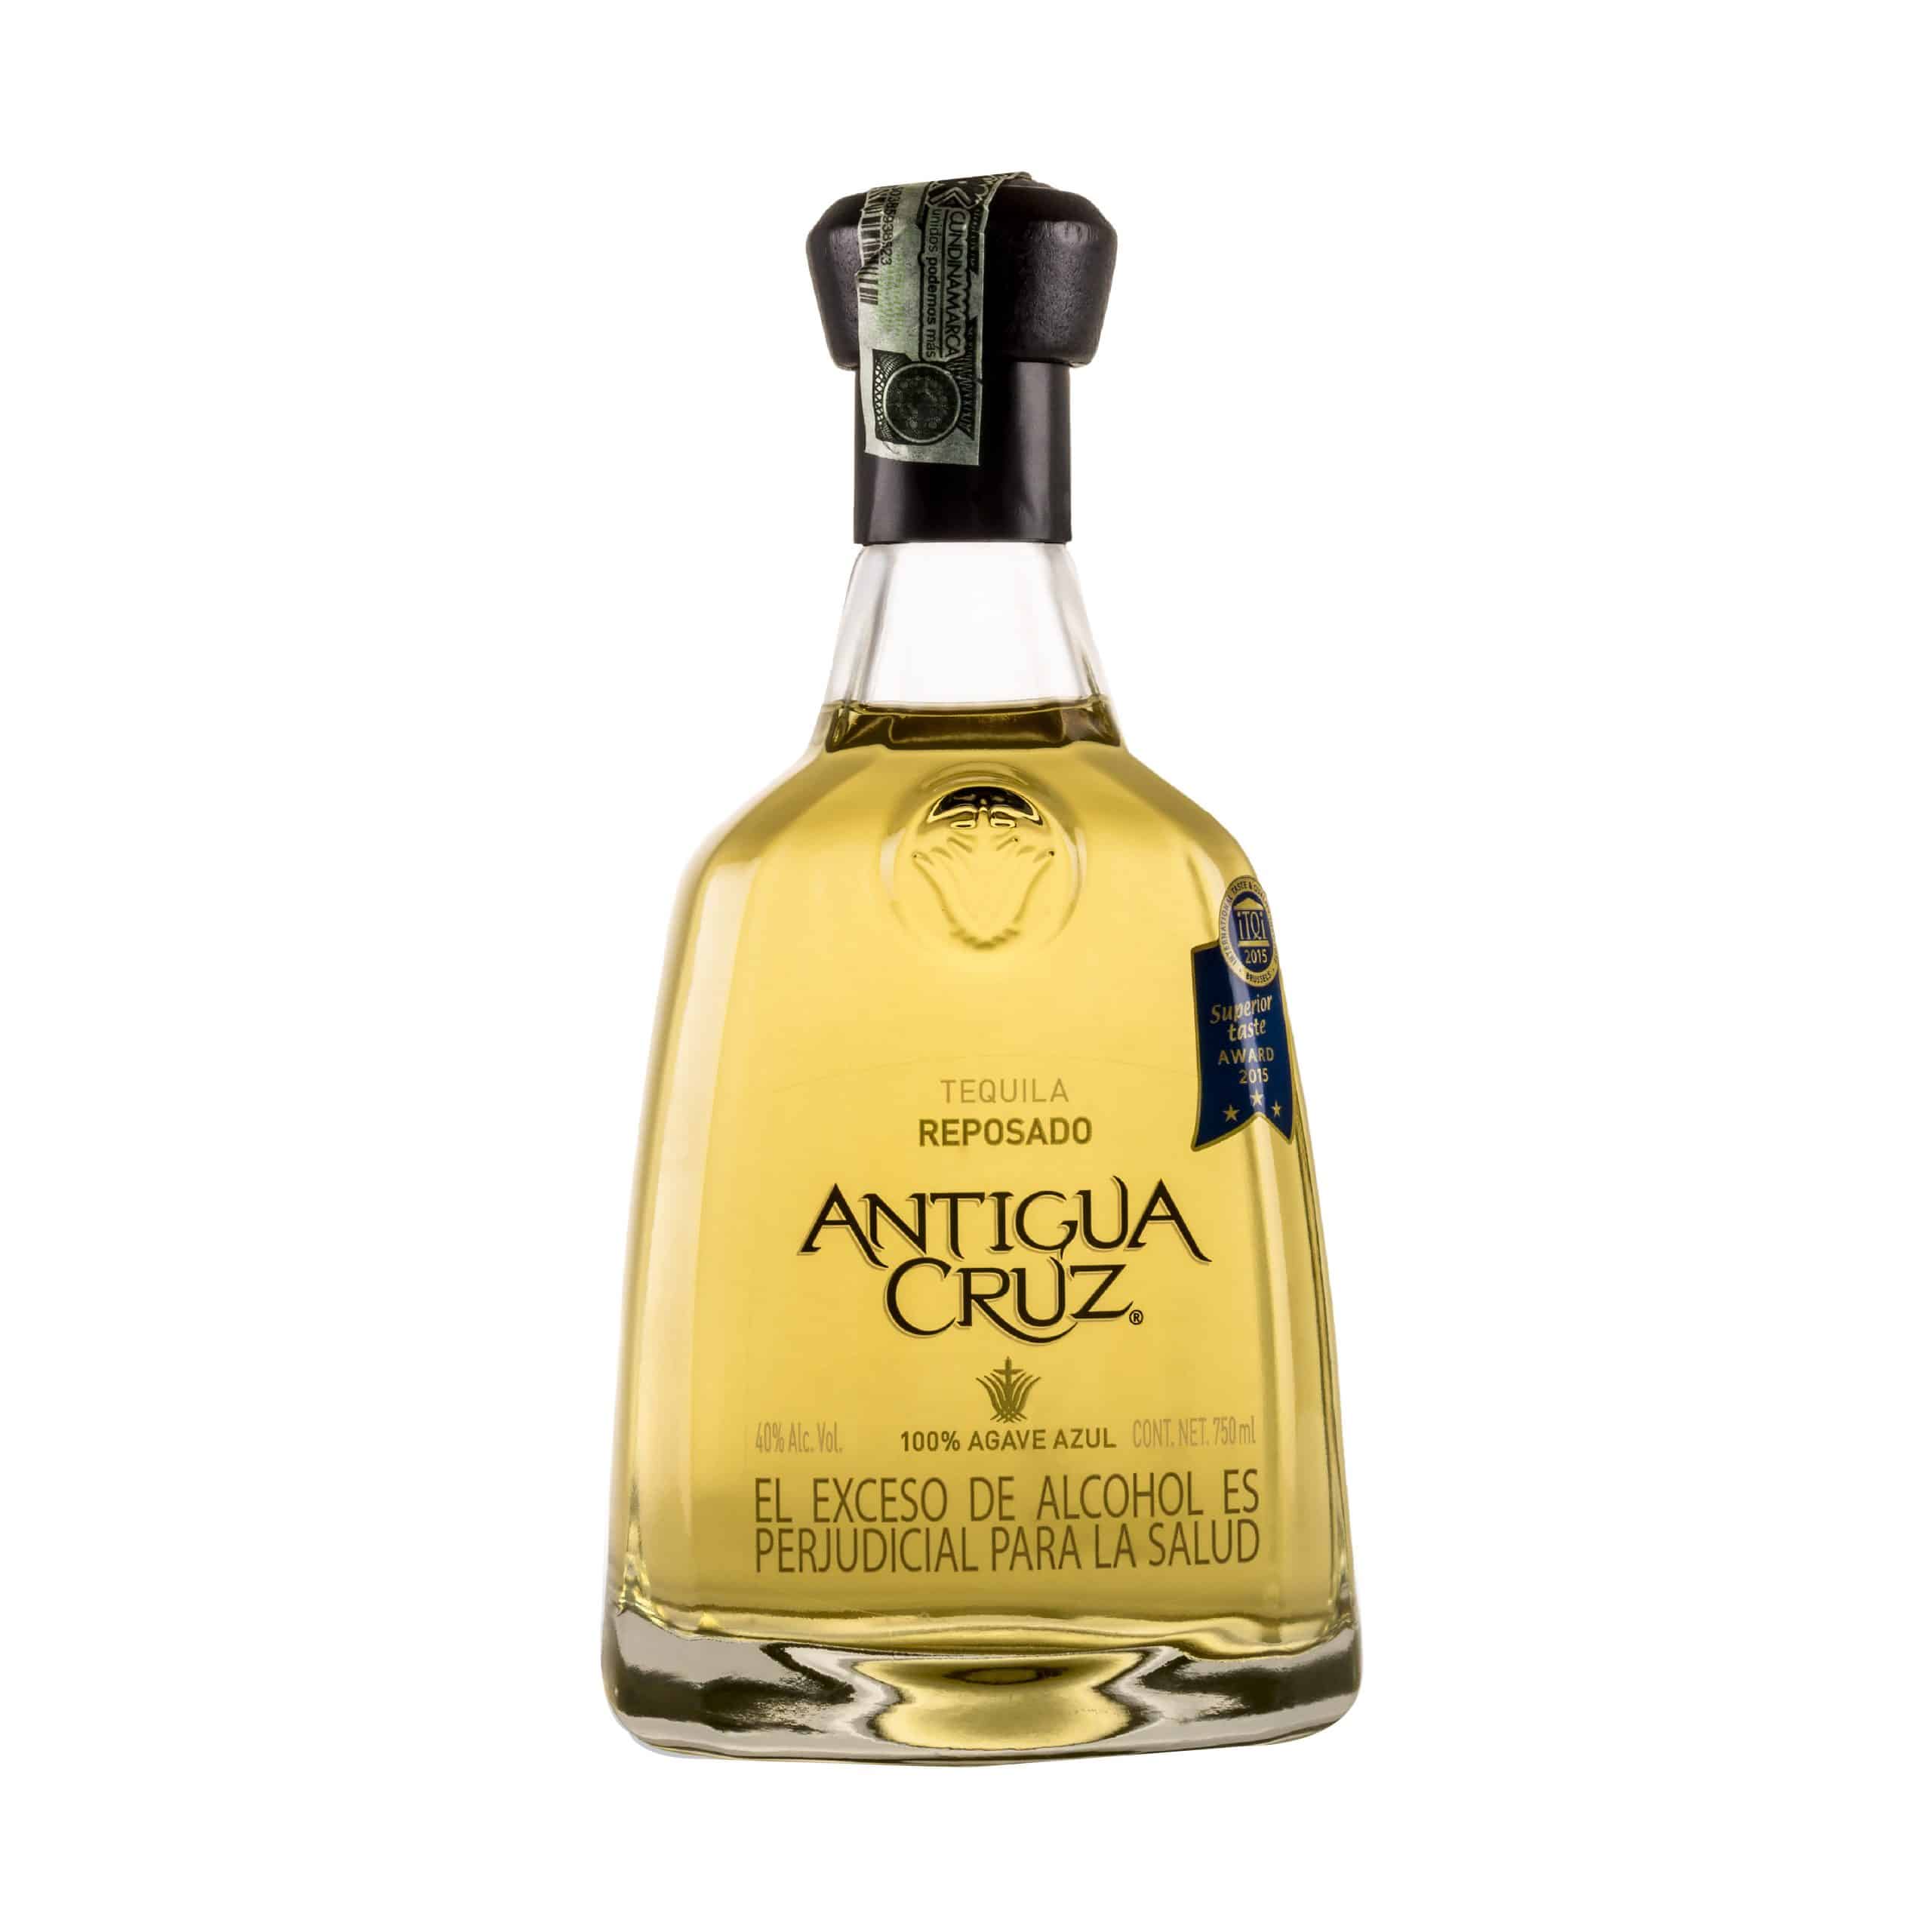 What Tequila Is Made With 100 Agave